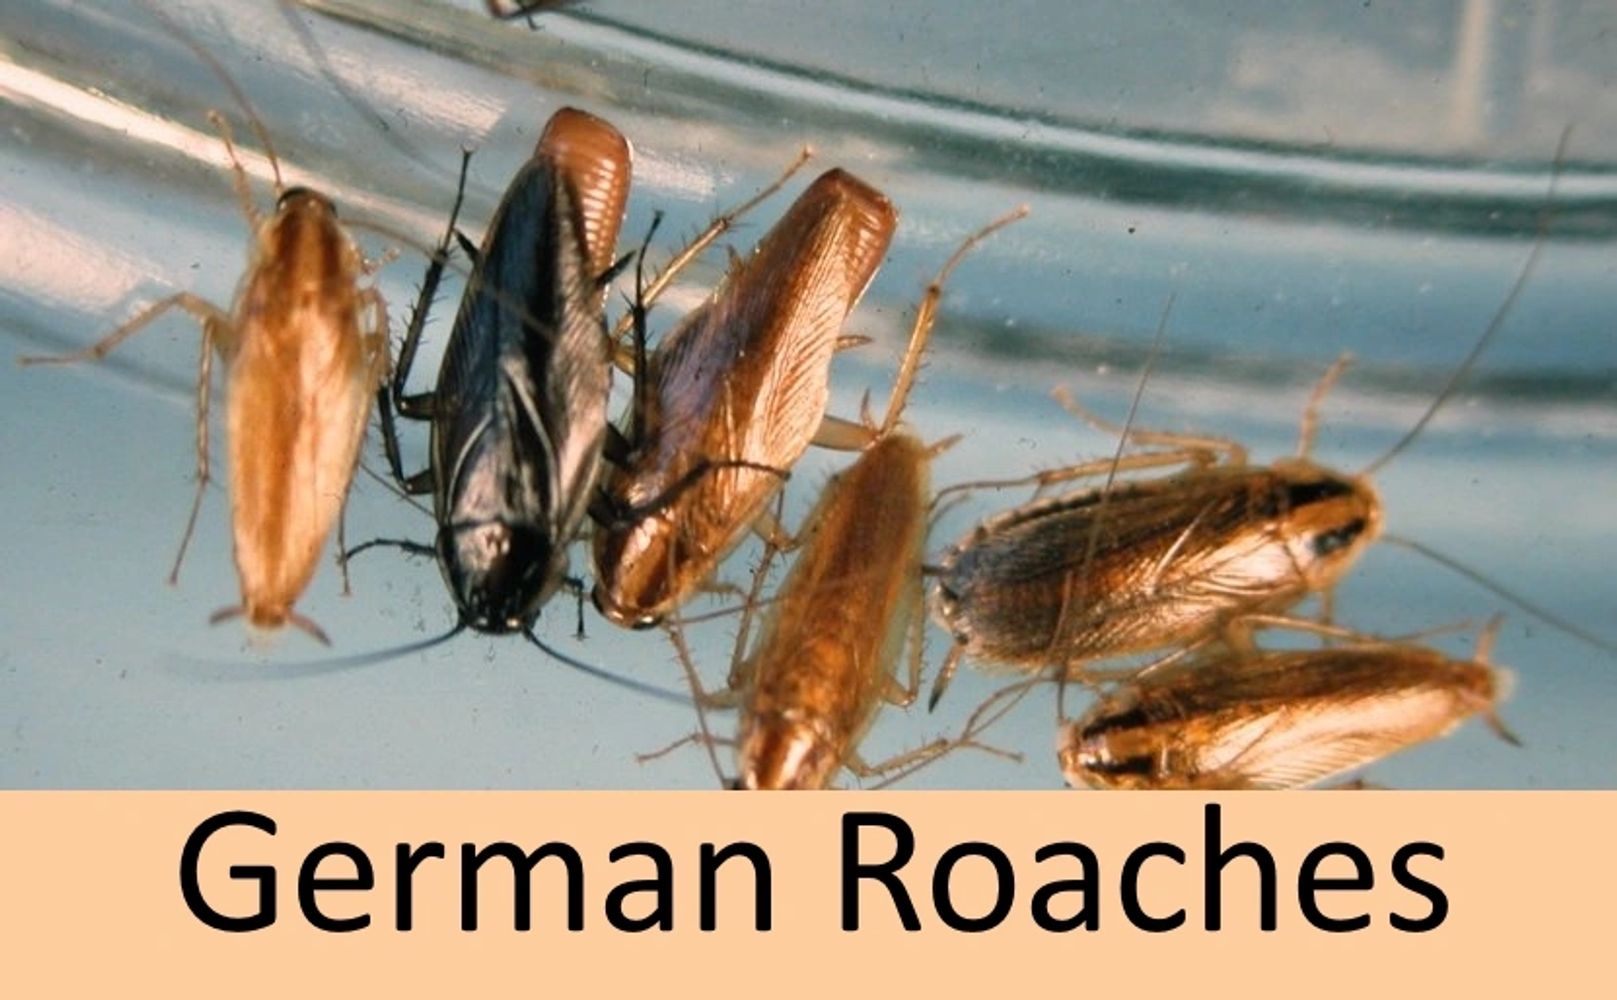 Roaches are Gone!! Rids roaches wherever they may be found in 3-4 days max!